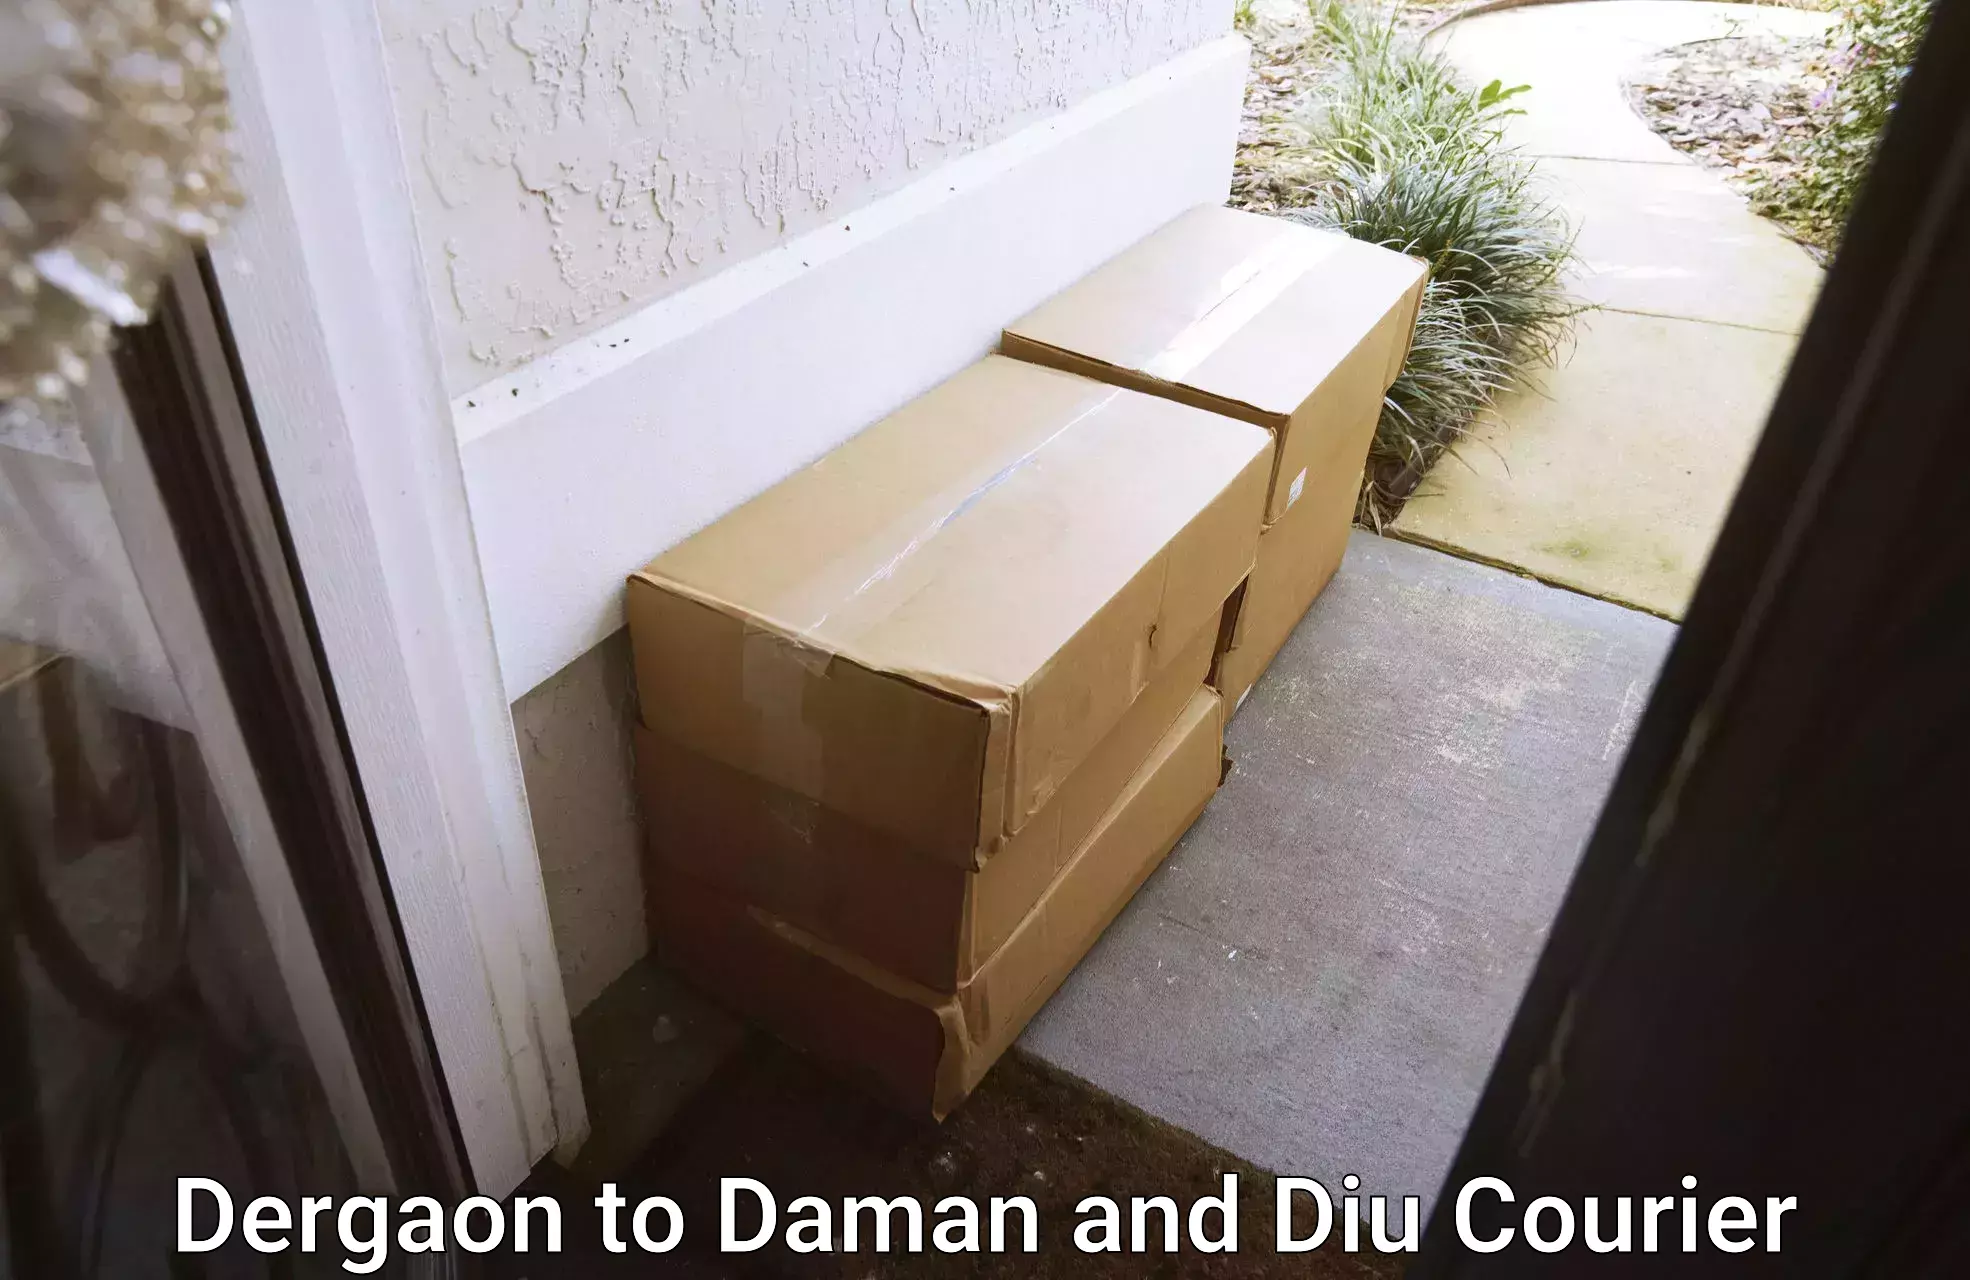 Flexible delivery scheduling Dergaon to Daman and Diu